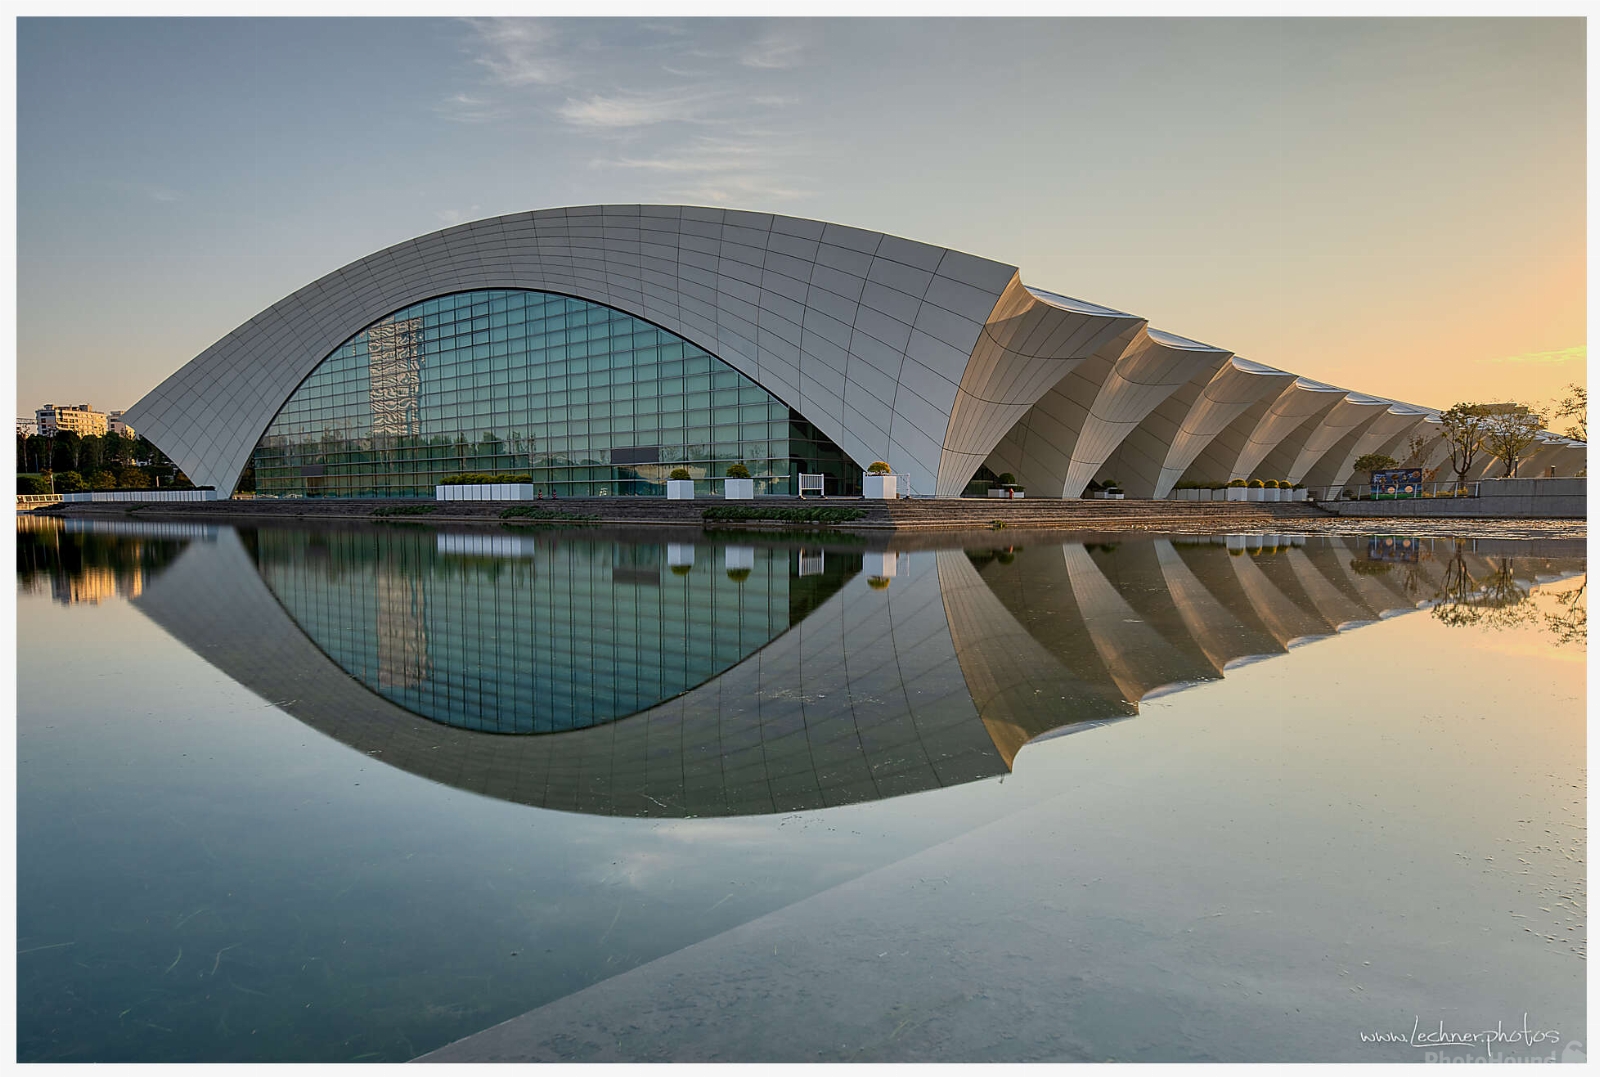 Image of Shanghai Oriental Sports Center by Florian Lechner